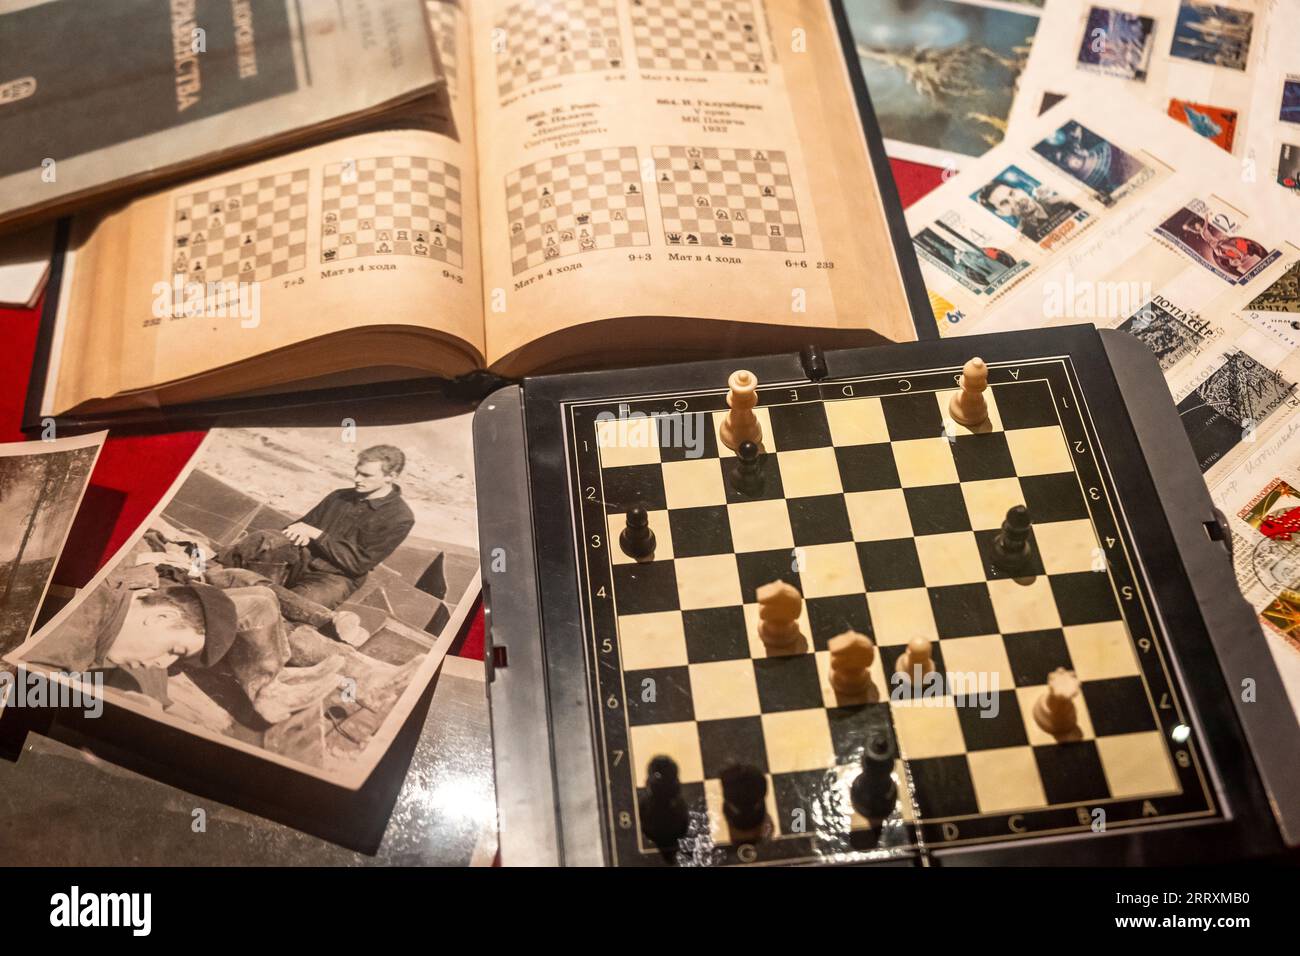 Exhibit on chess in Soviet Russia, at the Colección del Museo Ruso, Málaga, Spain Stock Photo